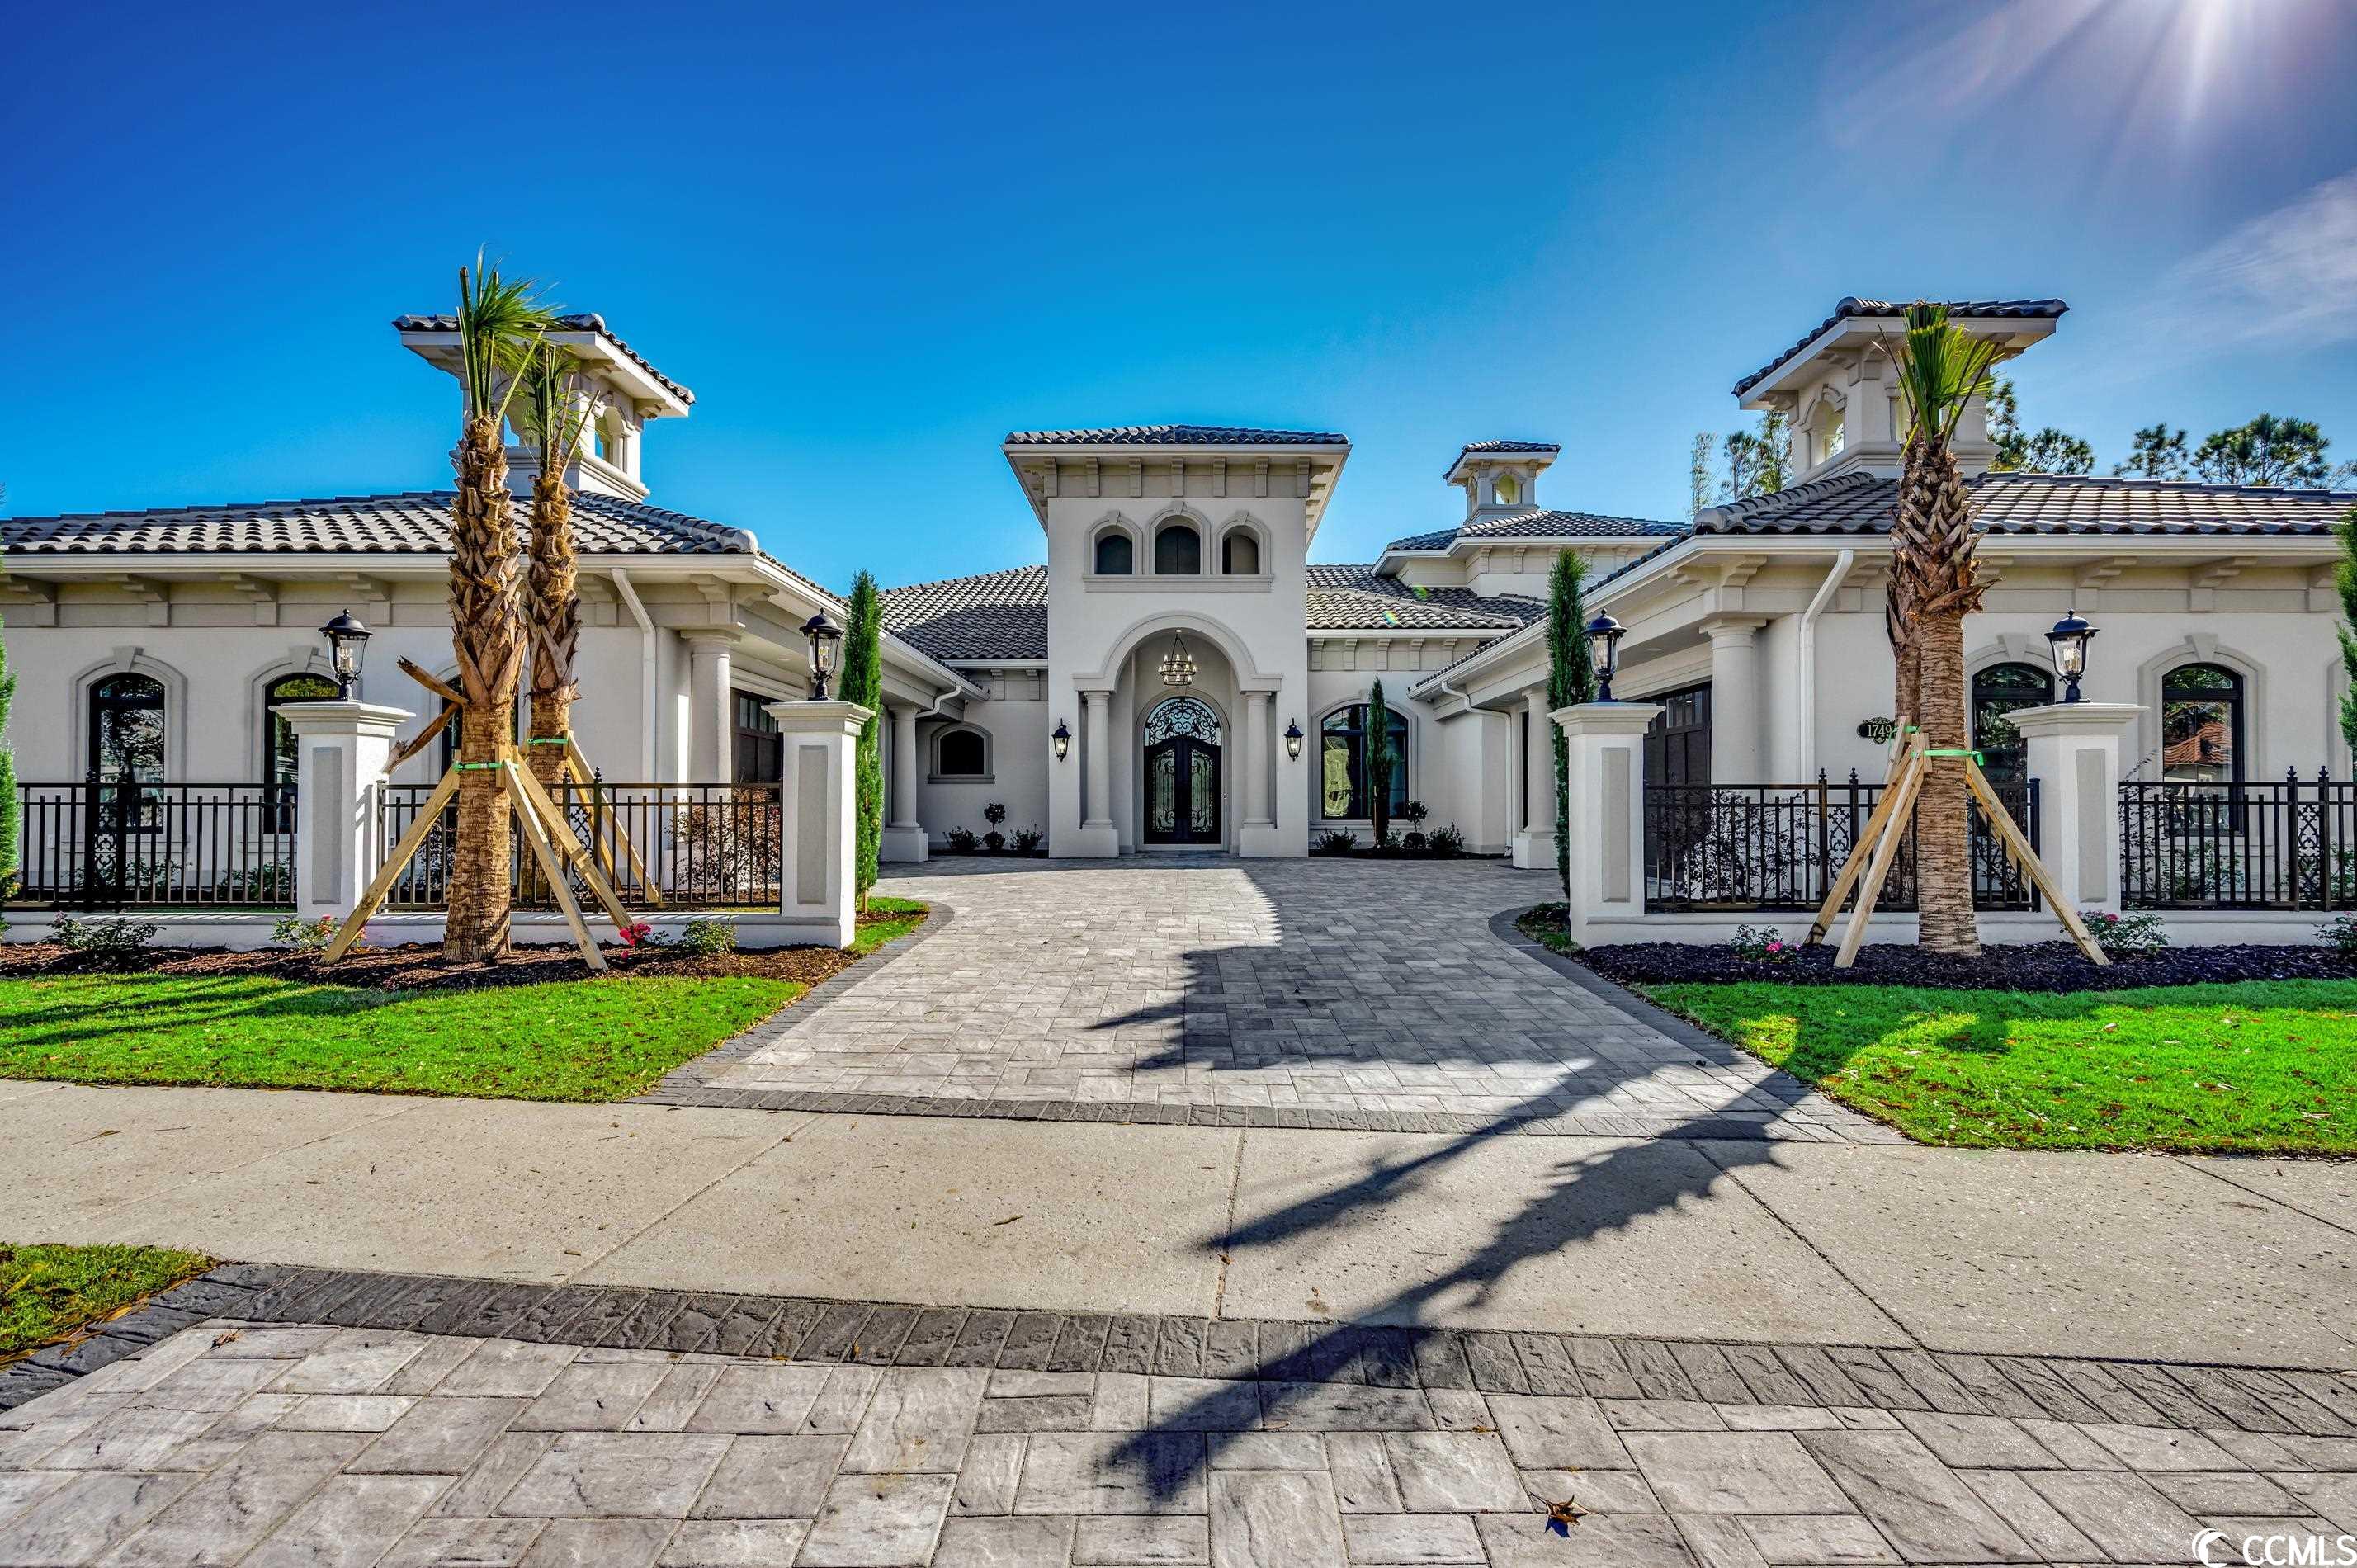 don't miss out on this wonderful opportunity to customize this brand new 5 bed 5.5 bath mediterranean masterpiece located inside the gated community of bal harbor at grande dunes. this home is being built on one of the last waterway lots available and boasts .75 acres. this home will feature 5 bedrooms with 5.5 baths on the main floor and 1 bedroom with a full bath and game room on the second that over looks the icw. also included will be a 4 car garage, boat dock with lift, outdoor pool and spa with breathtaking waterway views. some of the photos are of a similar house that was just built in a different section of the community. this house will differ slightly. grande dunes is a 2200 acre amenity-rich development filled with lifestyle opportunities unrivaled in the market. owners also enjoy the exquisite ocean club that has fine dining, ocean front pools, meeting rooms, beach amenities and is truly are remarkable place for events. grande dunes include two prestigious 18 hole golf courses. the resort course is open to the public and the nick price designed "members club" is semi private. other features are a 126 wet slip deep water marina able to accommodate vessels up to 120 feet or more and a state-of-the art har-tru tennis facility. grande dunes is a wonderful and private community that sits conveniently in myrtle beach, close to shopping, dining and roughly a mile from grand strand medical center. come live the grande dunes lifestyle! contact the listing agent for more information and to schedule a viewing.